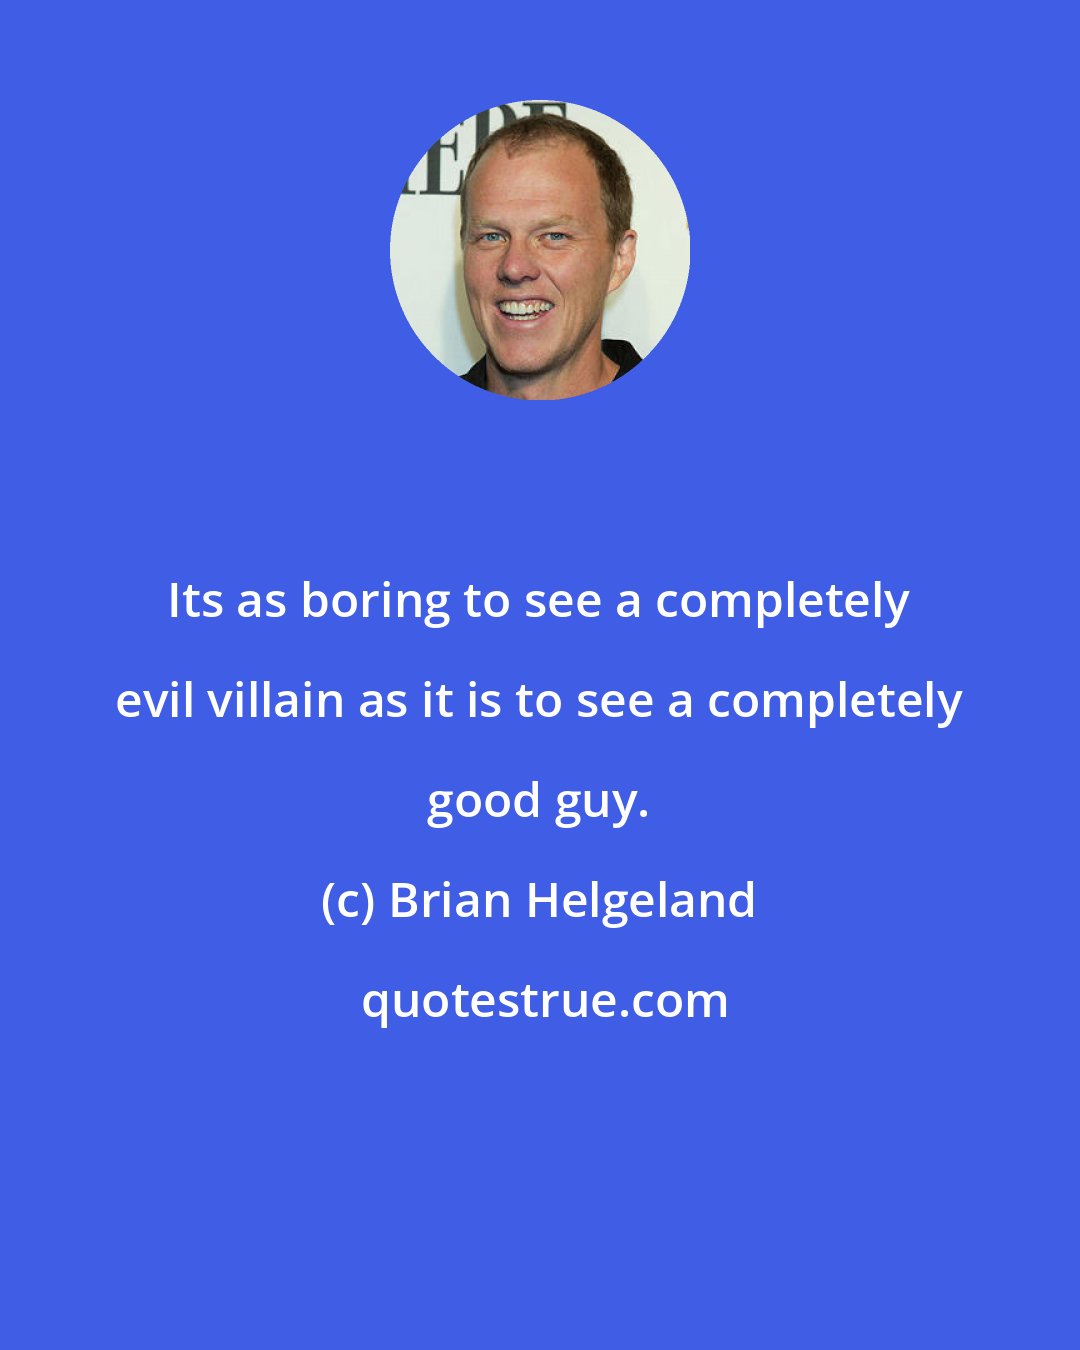 Brian Helgeland: Its as boring to see a completely evil villain as it is to see a completely good guy.